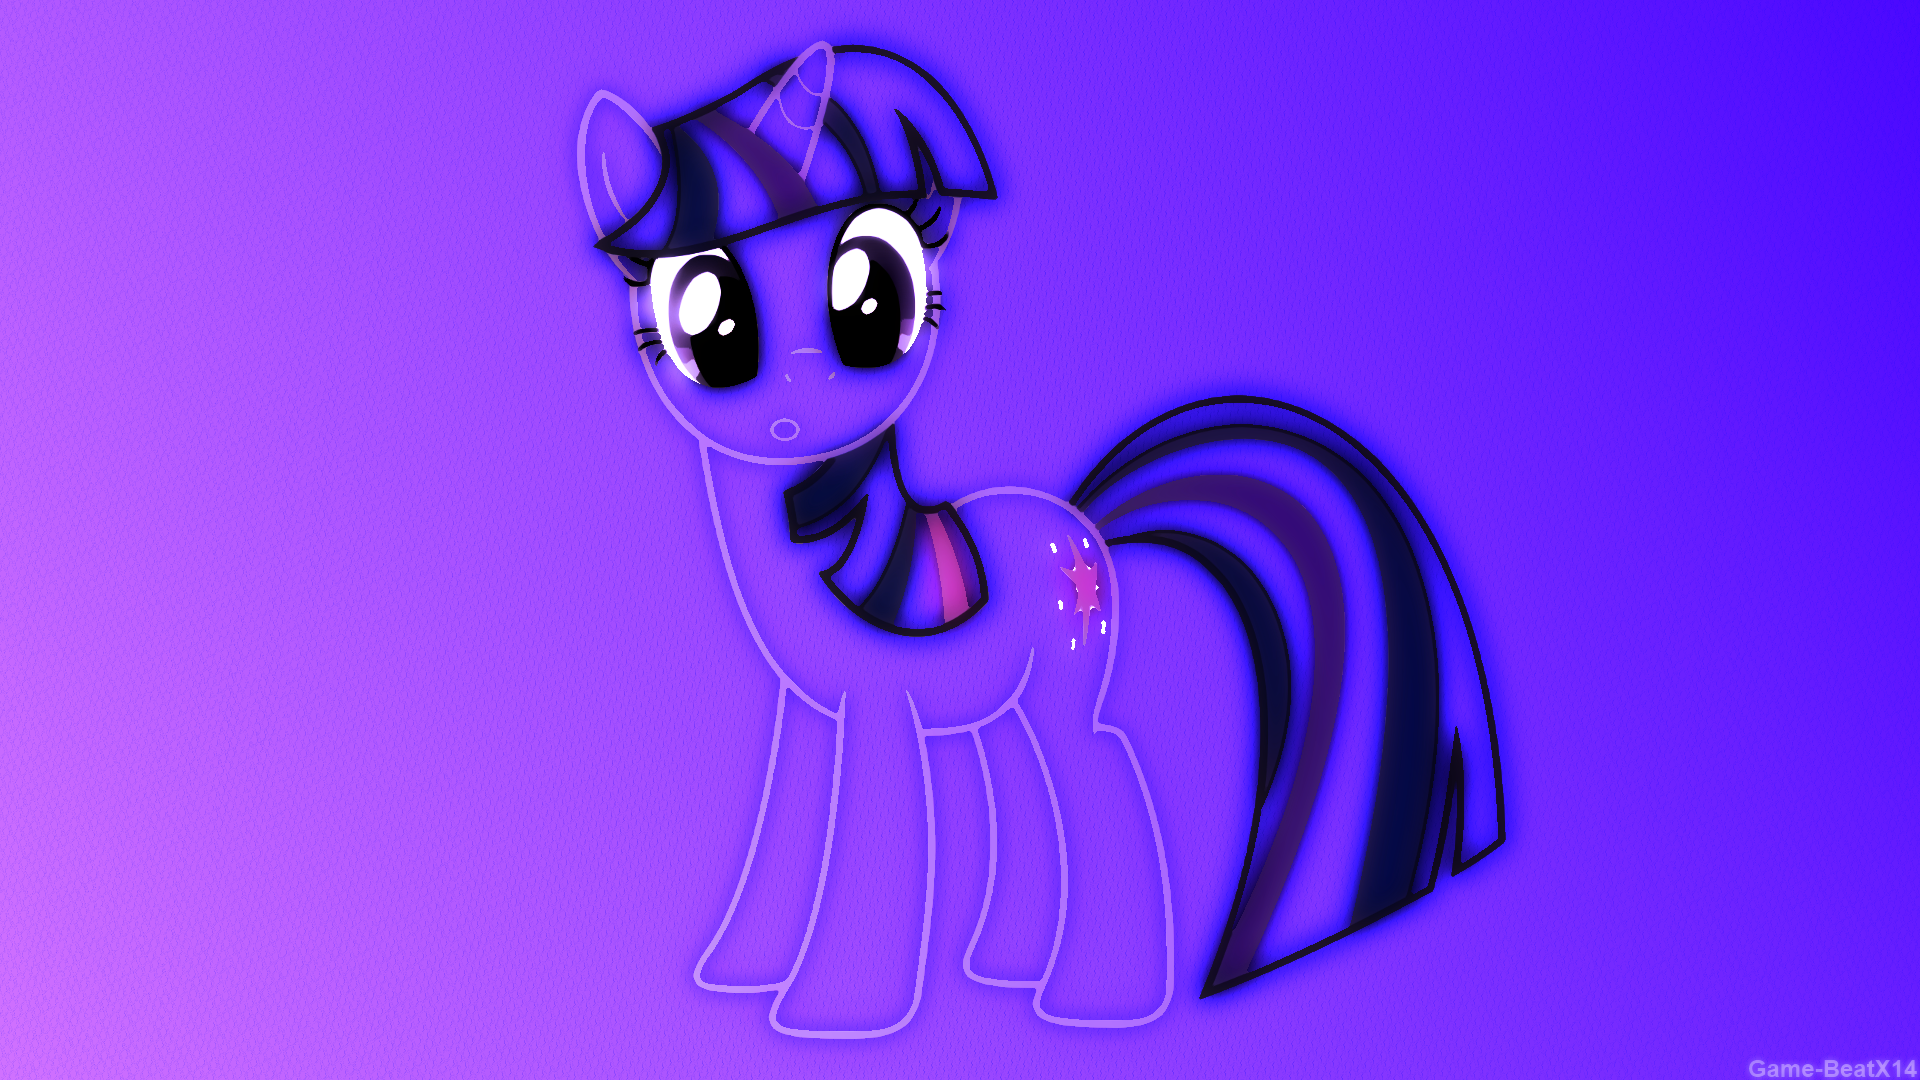 Twilight Sparkle Outline Wallpaper by Game-BeatX14 and xPesifeindx